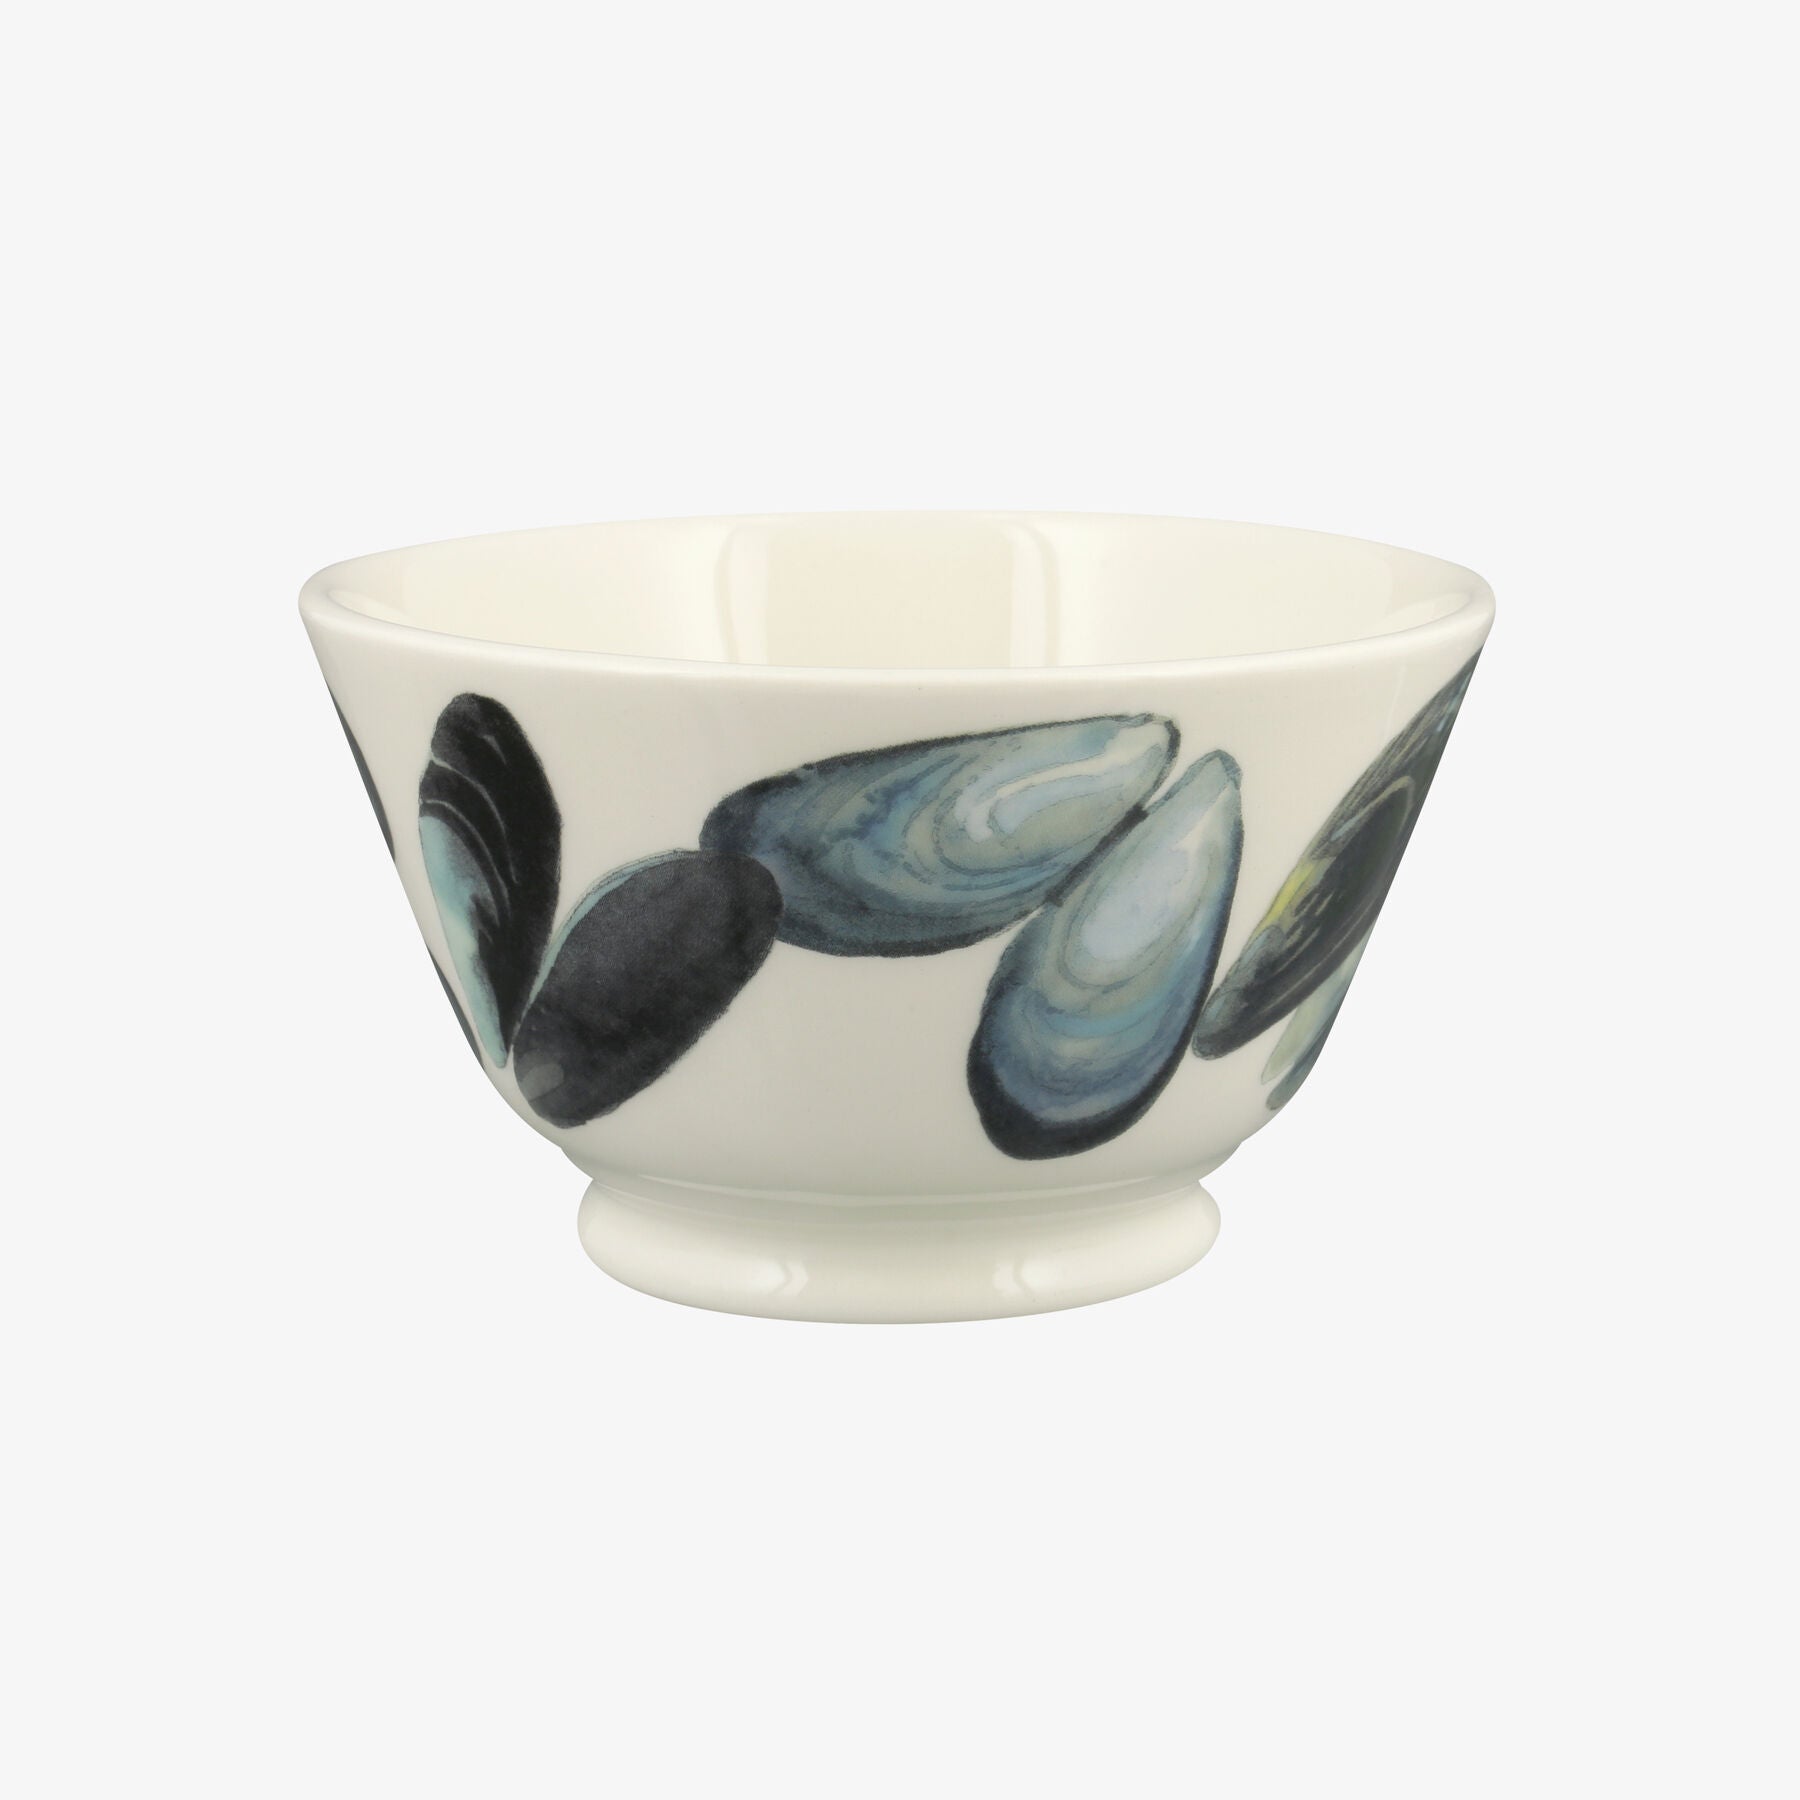 Mussels Small Old Bowl - Unique Handmade & Handpainted English Earthenware Decorative Plates  | Emma